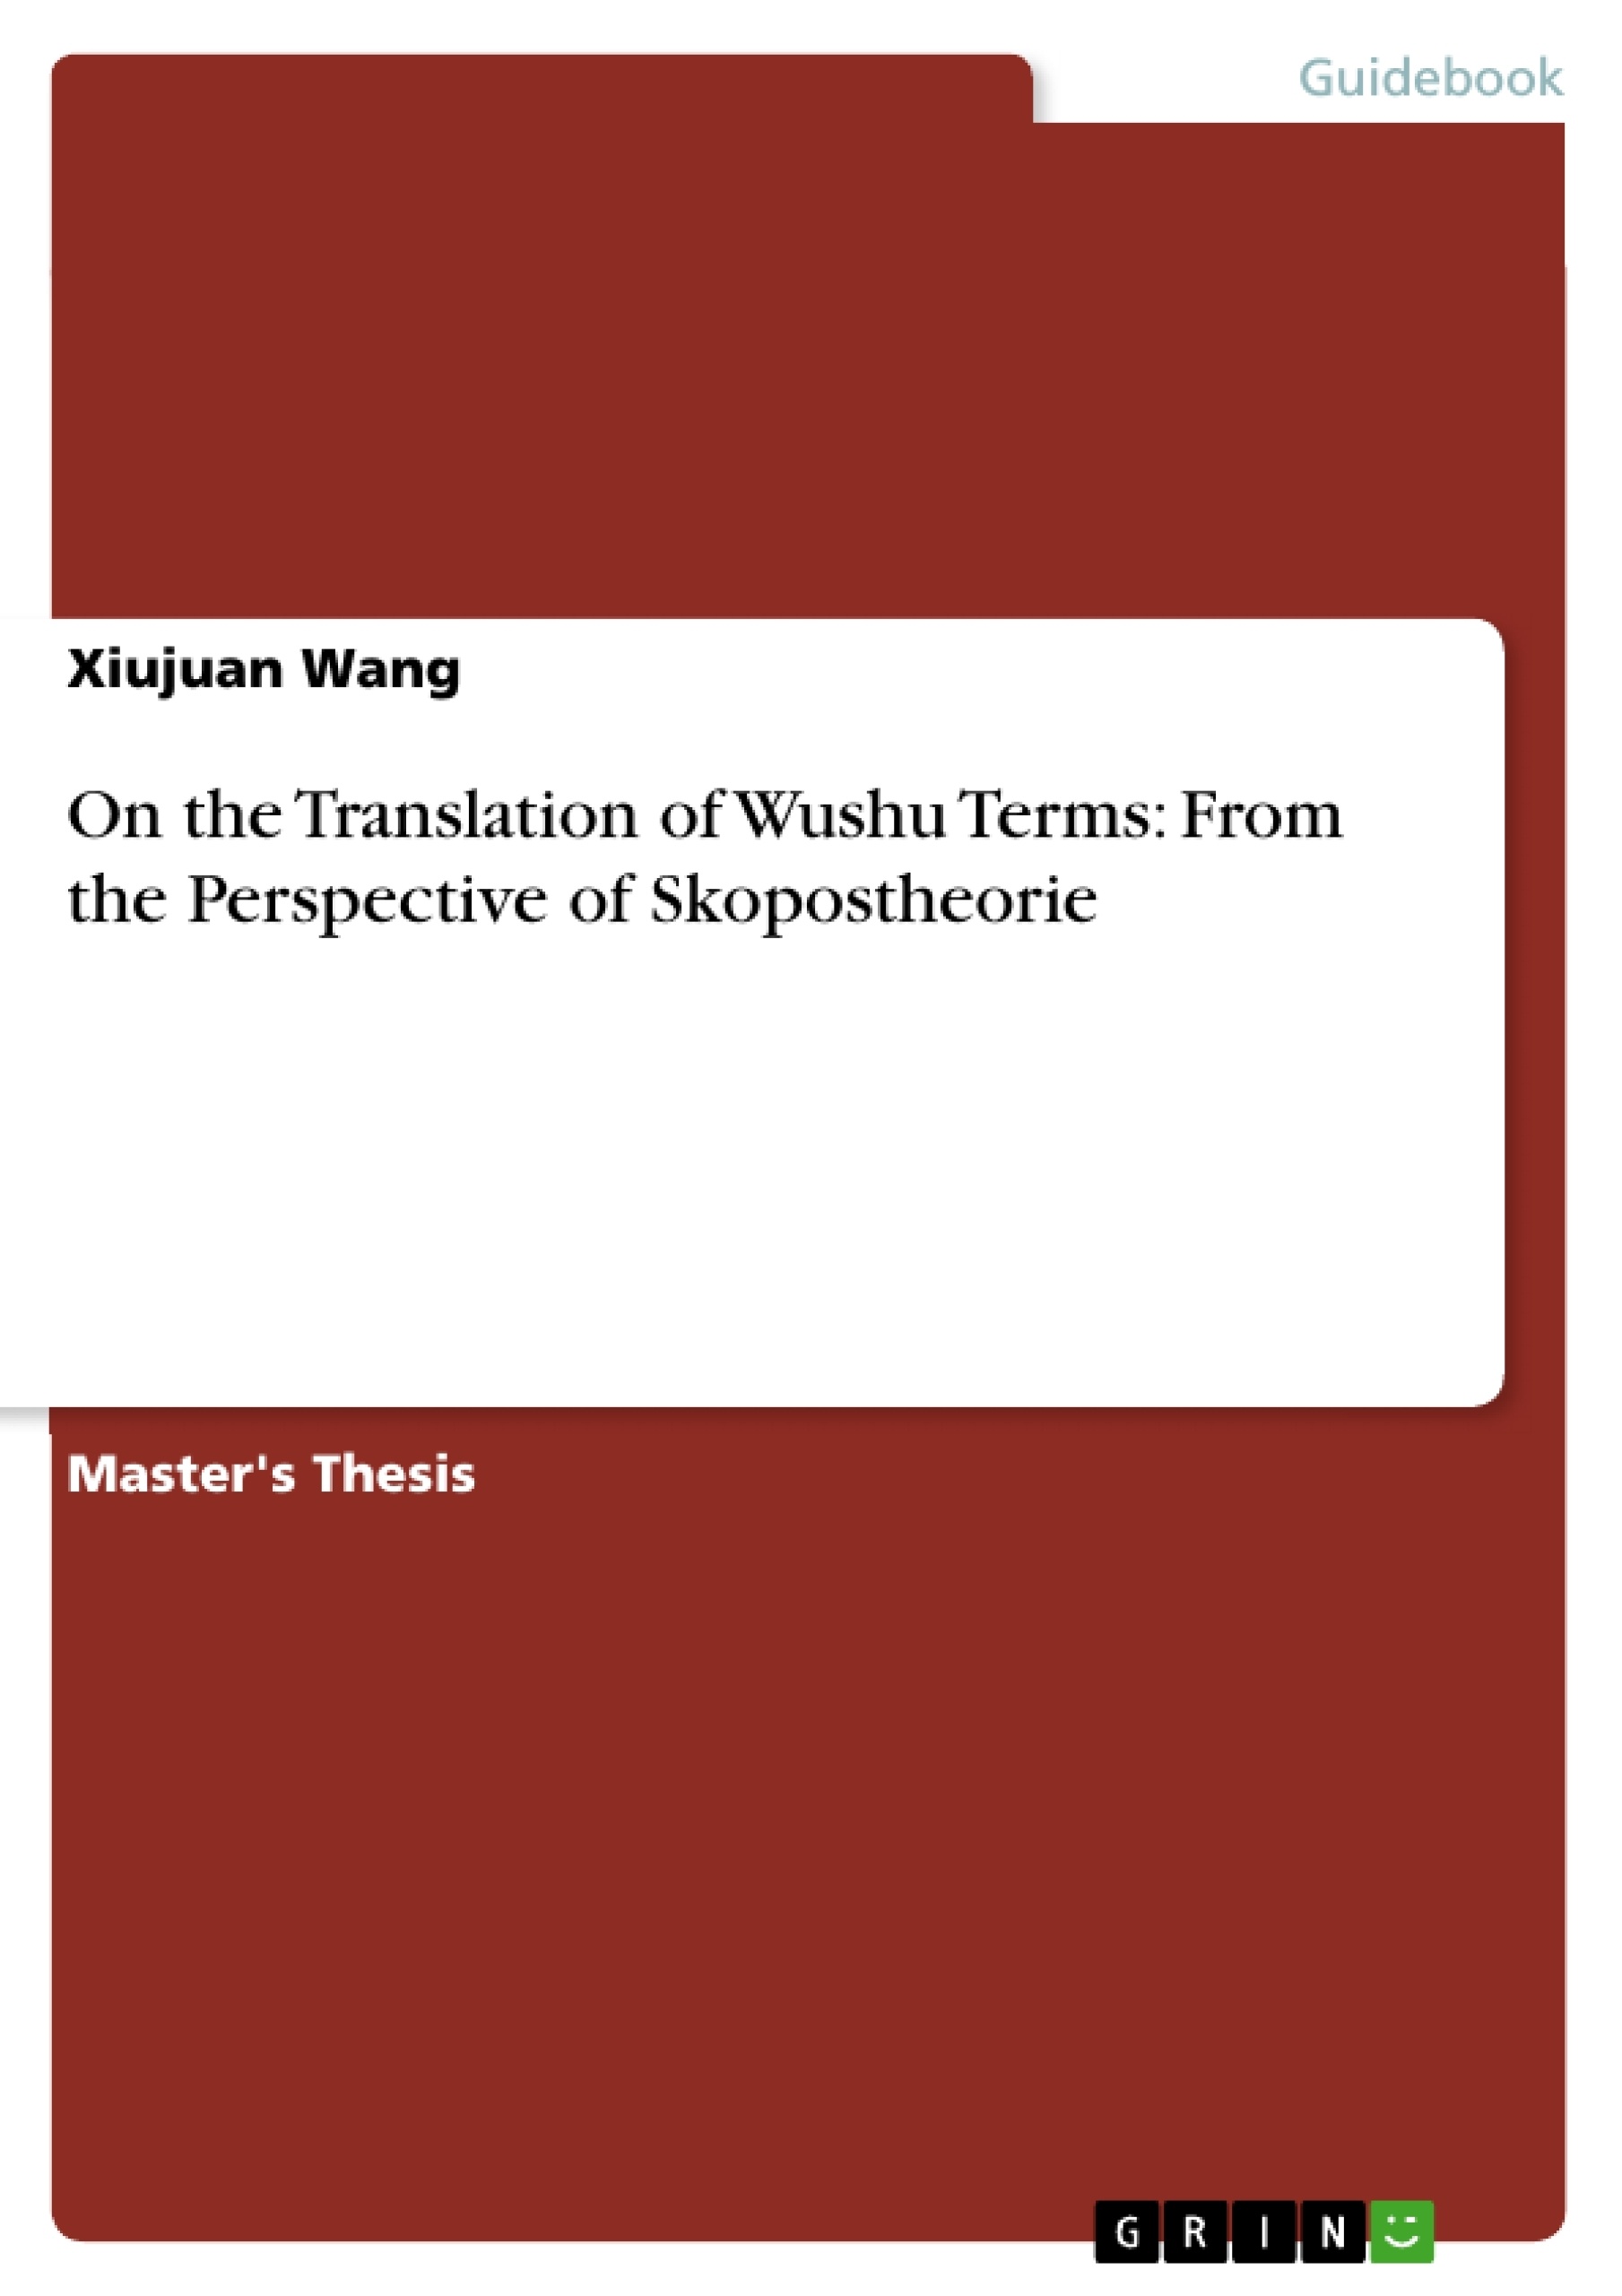 Title: On the Translation of Wushu Terms: From the Perspective of Skopostheorie